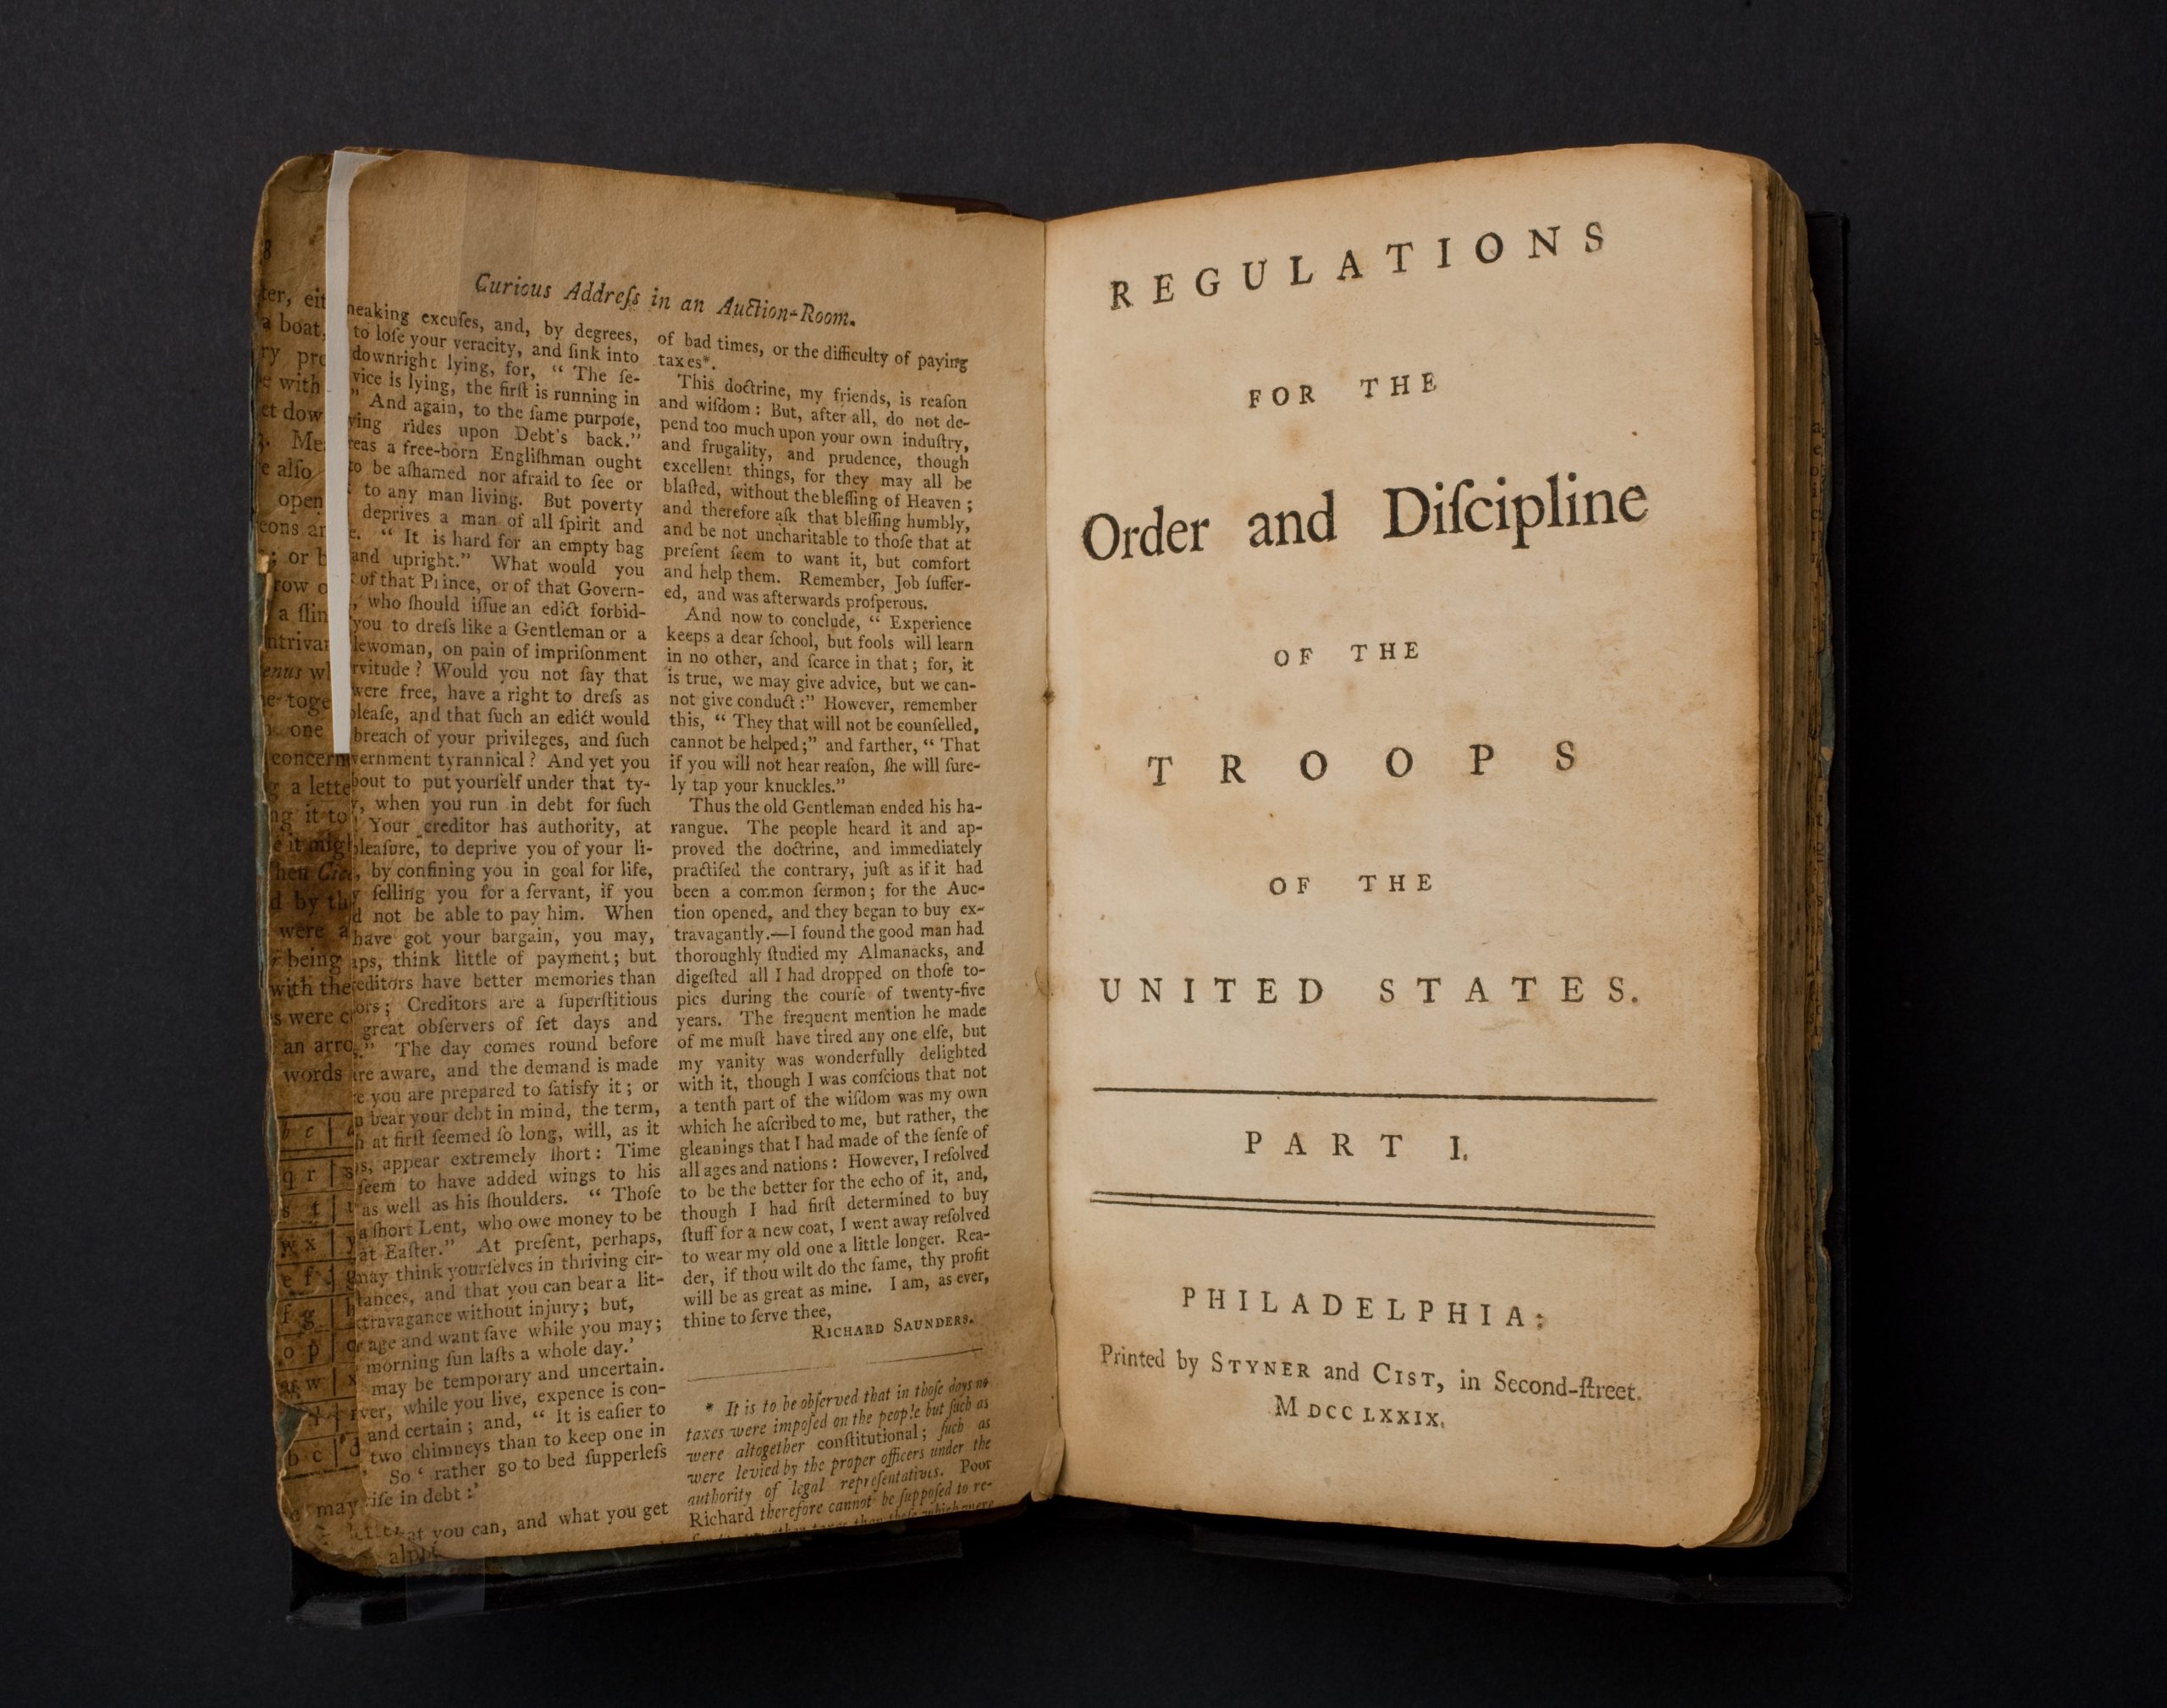 A 1779 edition of Baron von Steuben's Regulation for the Order and Discipline of the Troops